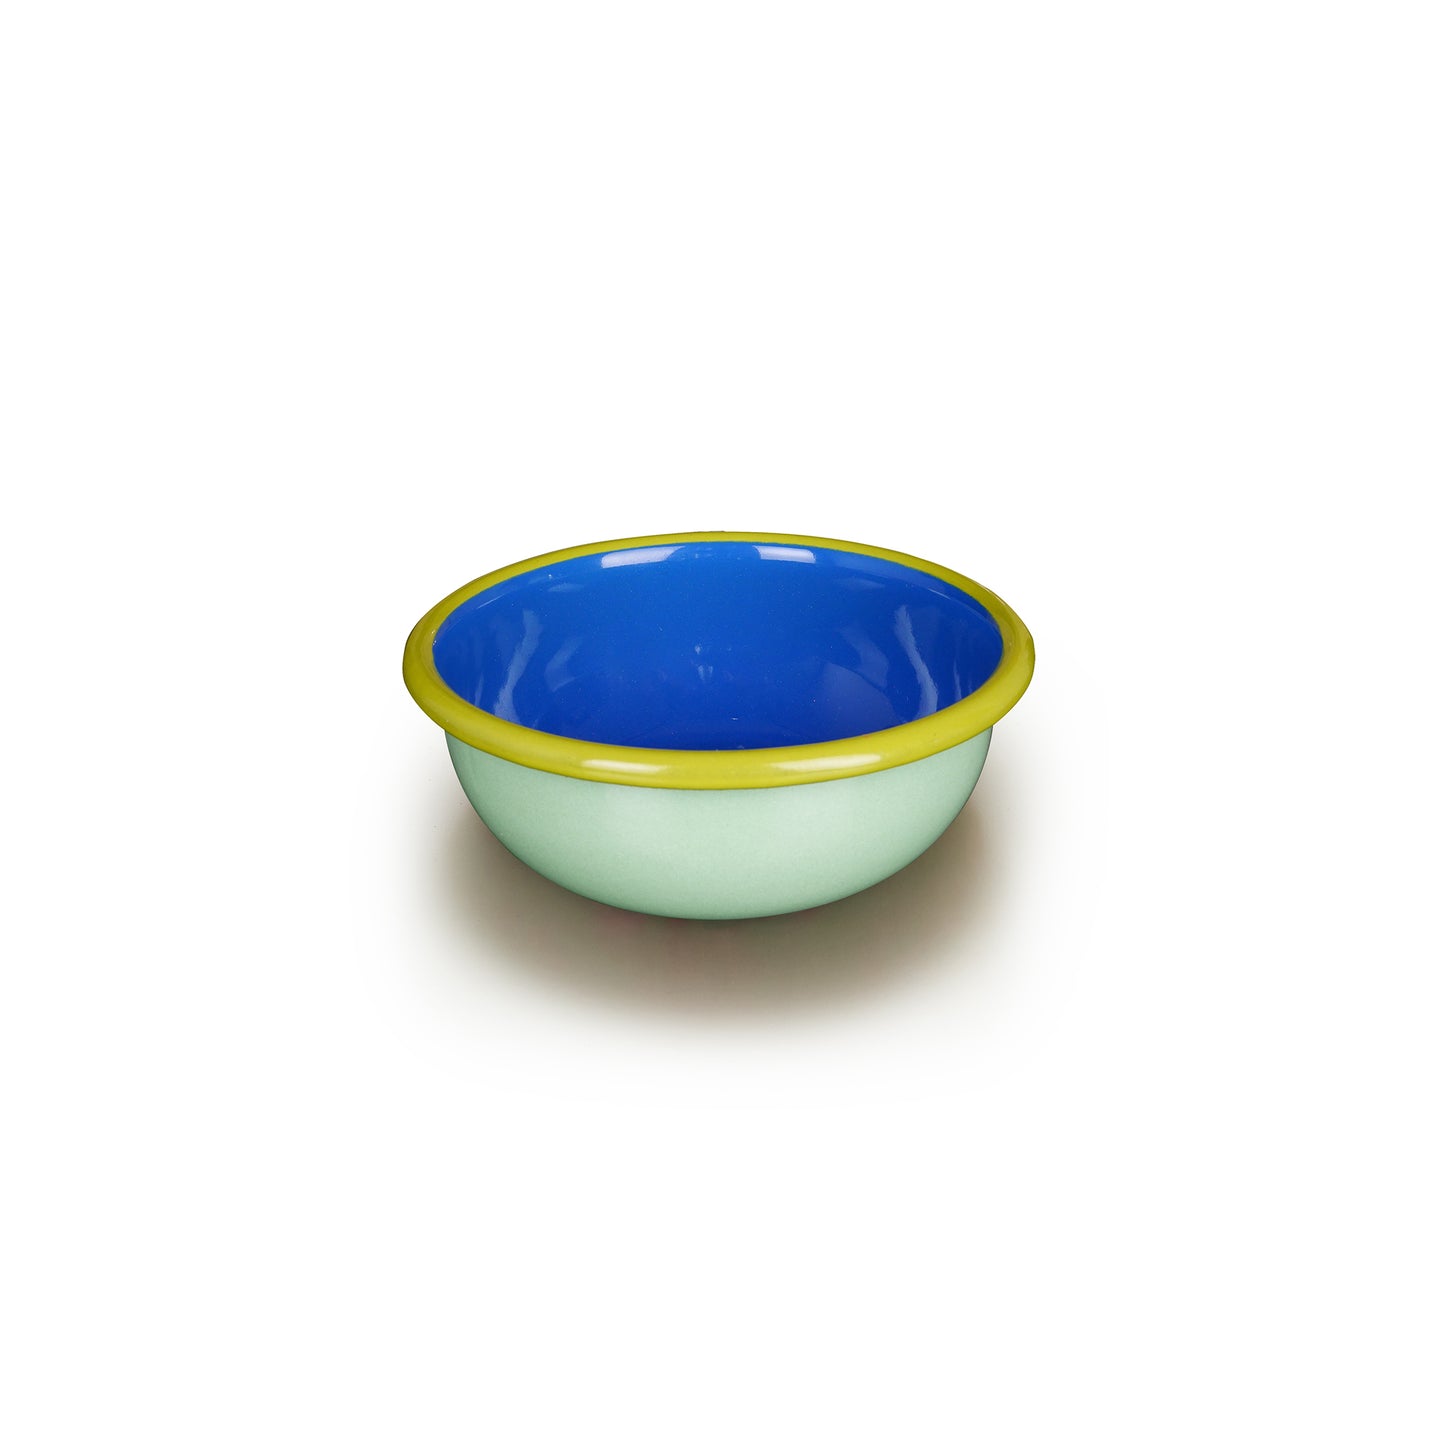 Colorama Bowl 5.25" Mint and Electric Blue with Chartreuse Rim